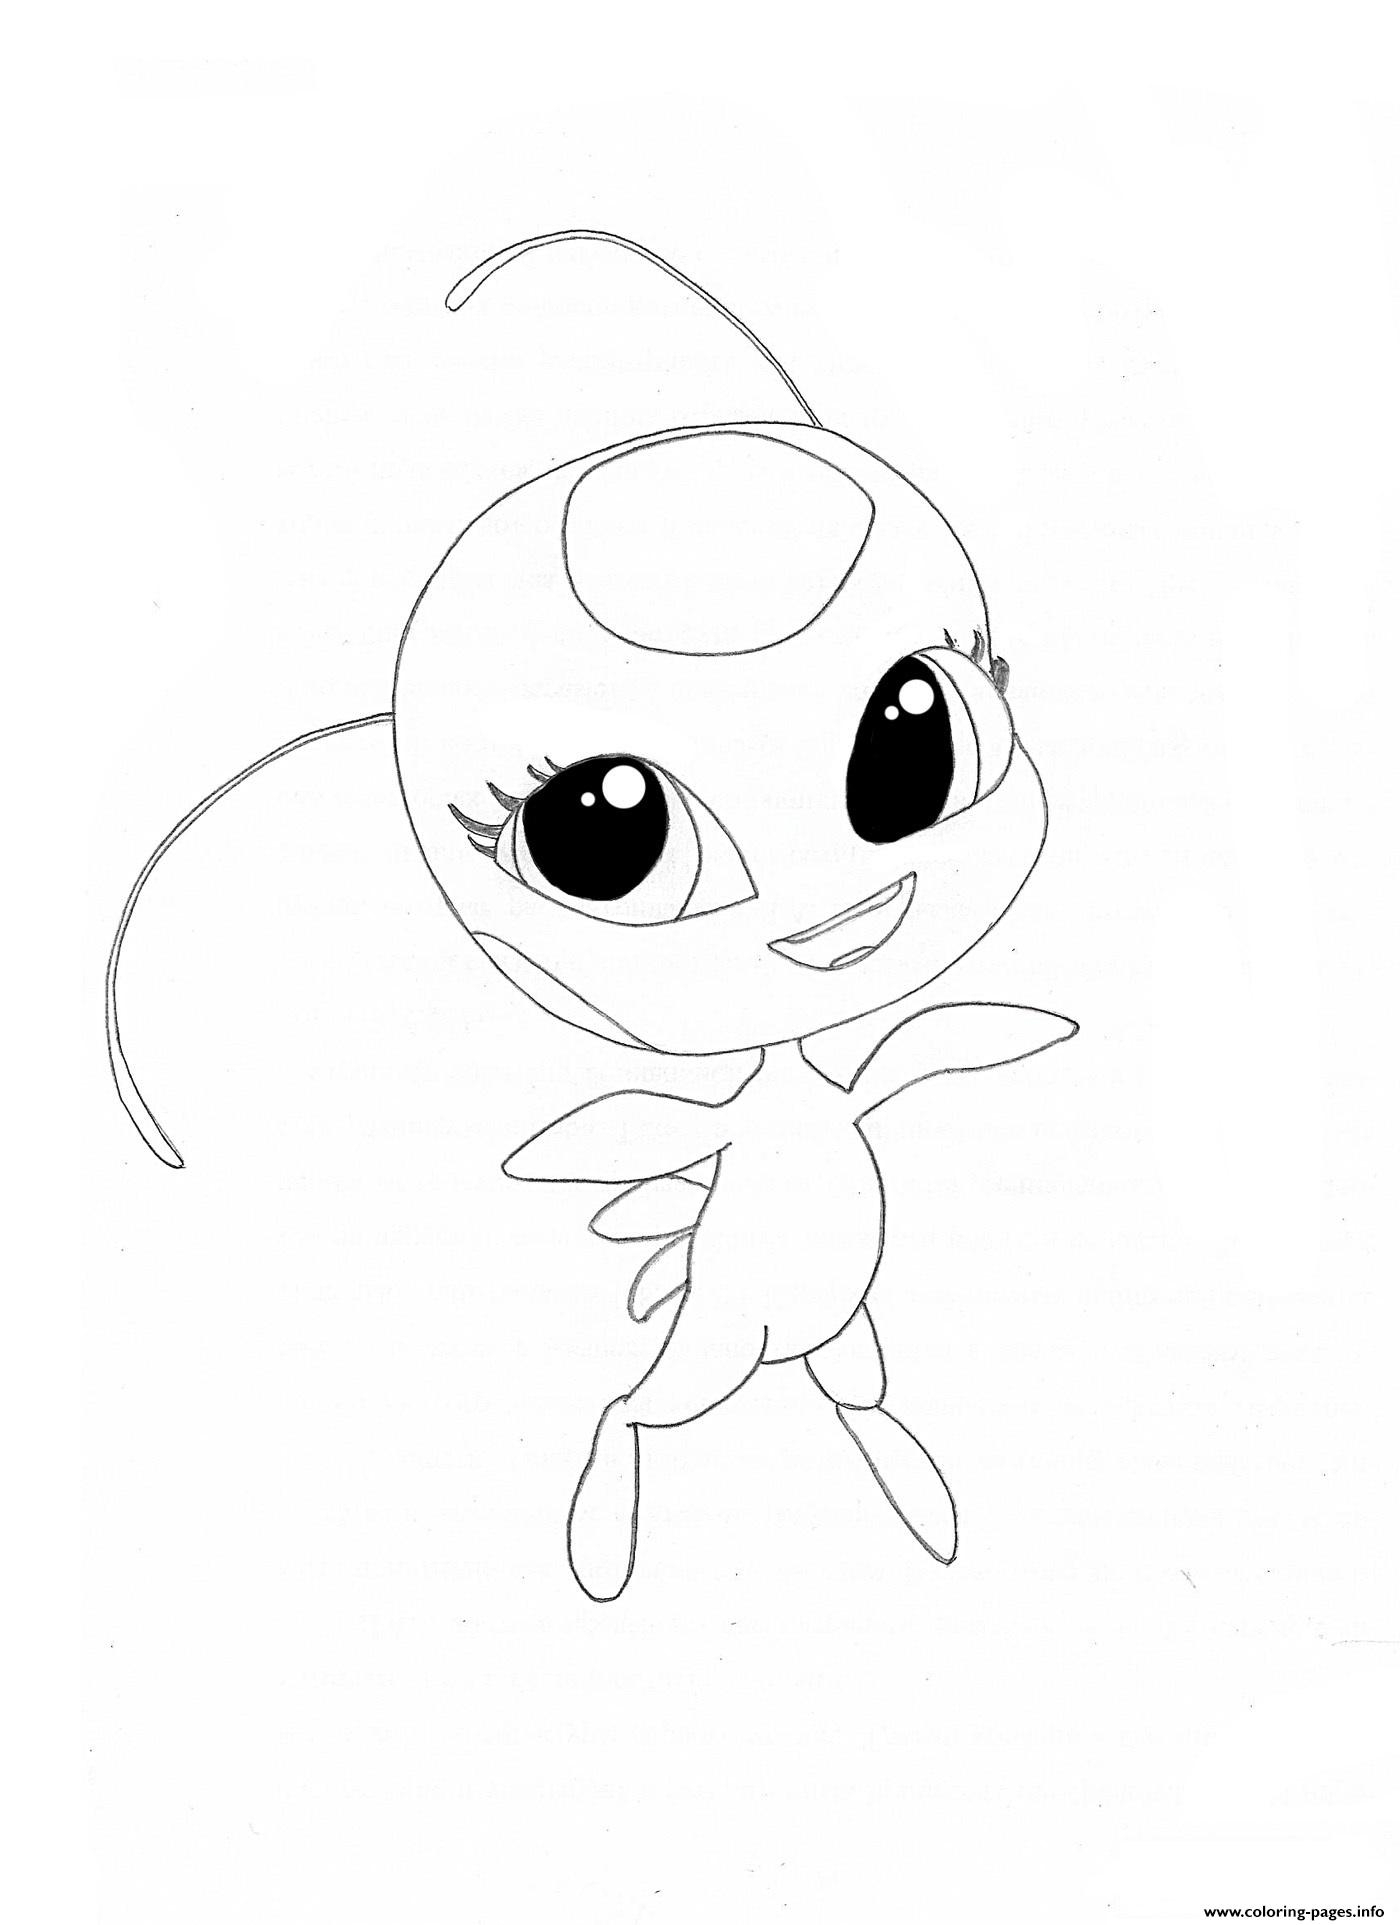 Bug Coloring Pages For Kids Coloring Pages Lady Bug And Cat Noir Coloring Pages For Kids With